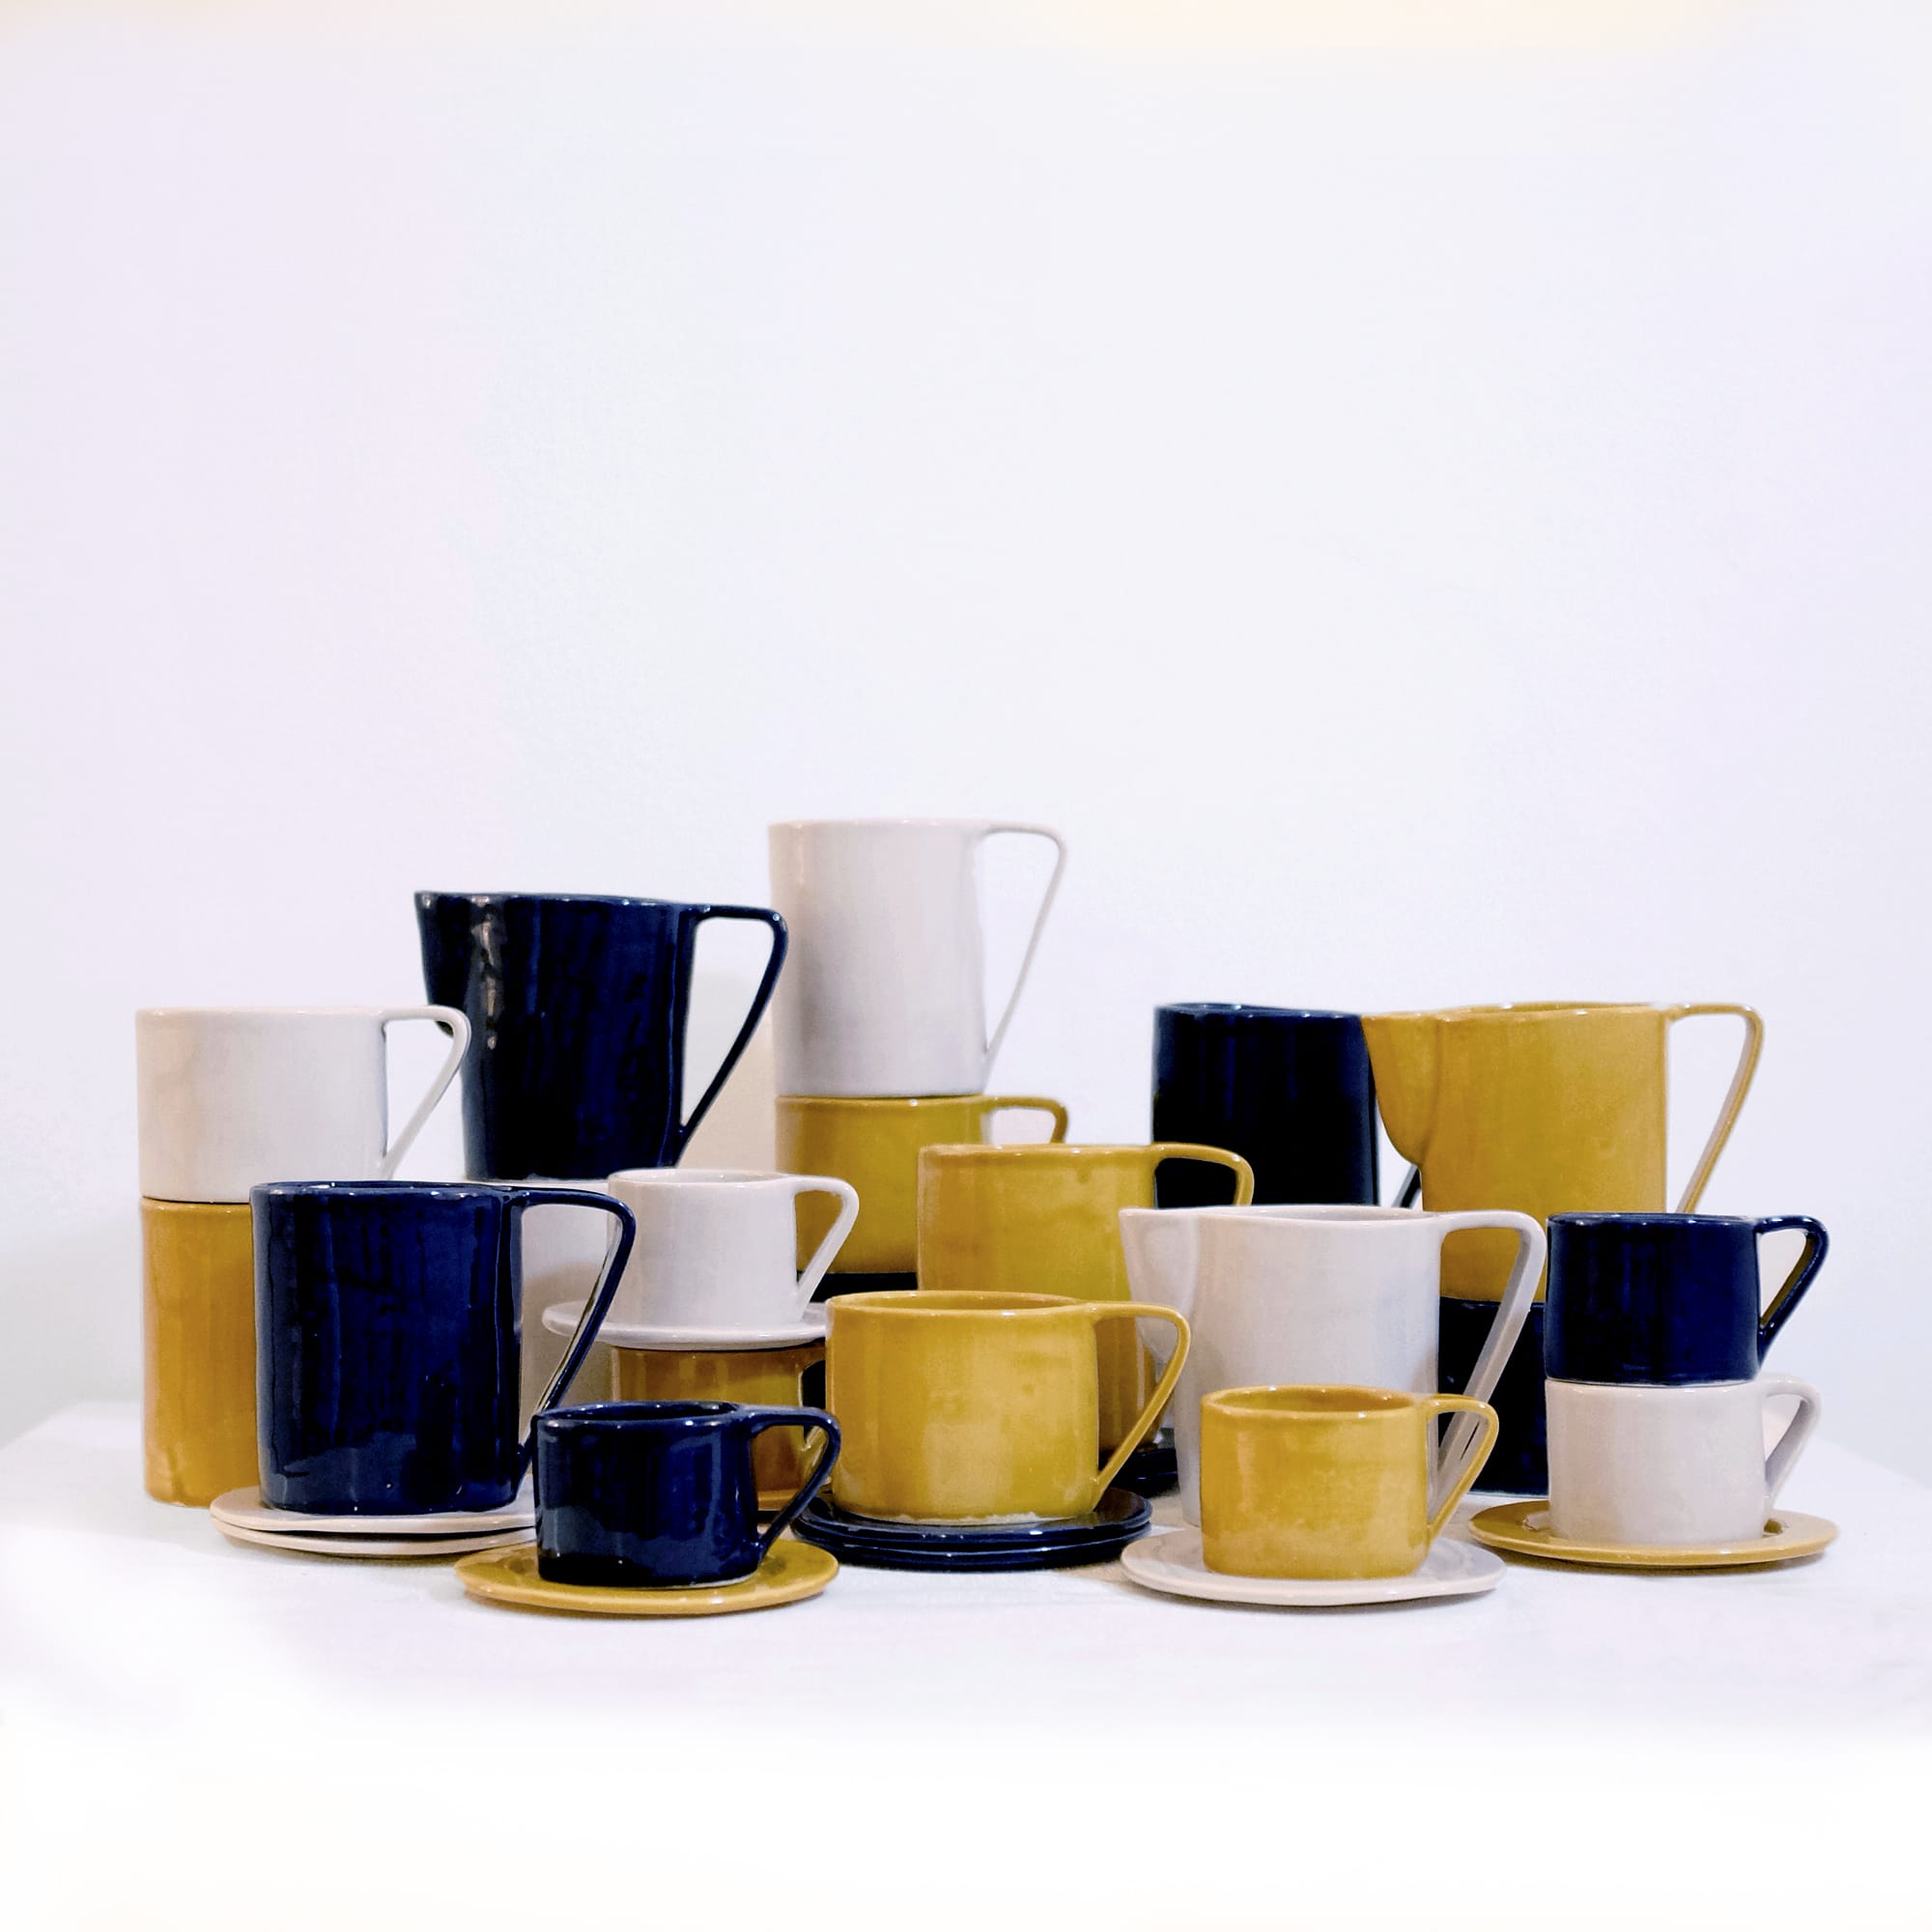 Milano Sole Set of 4 Espresso cups and saucers - Marta Benet